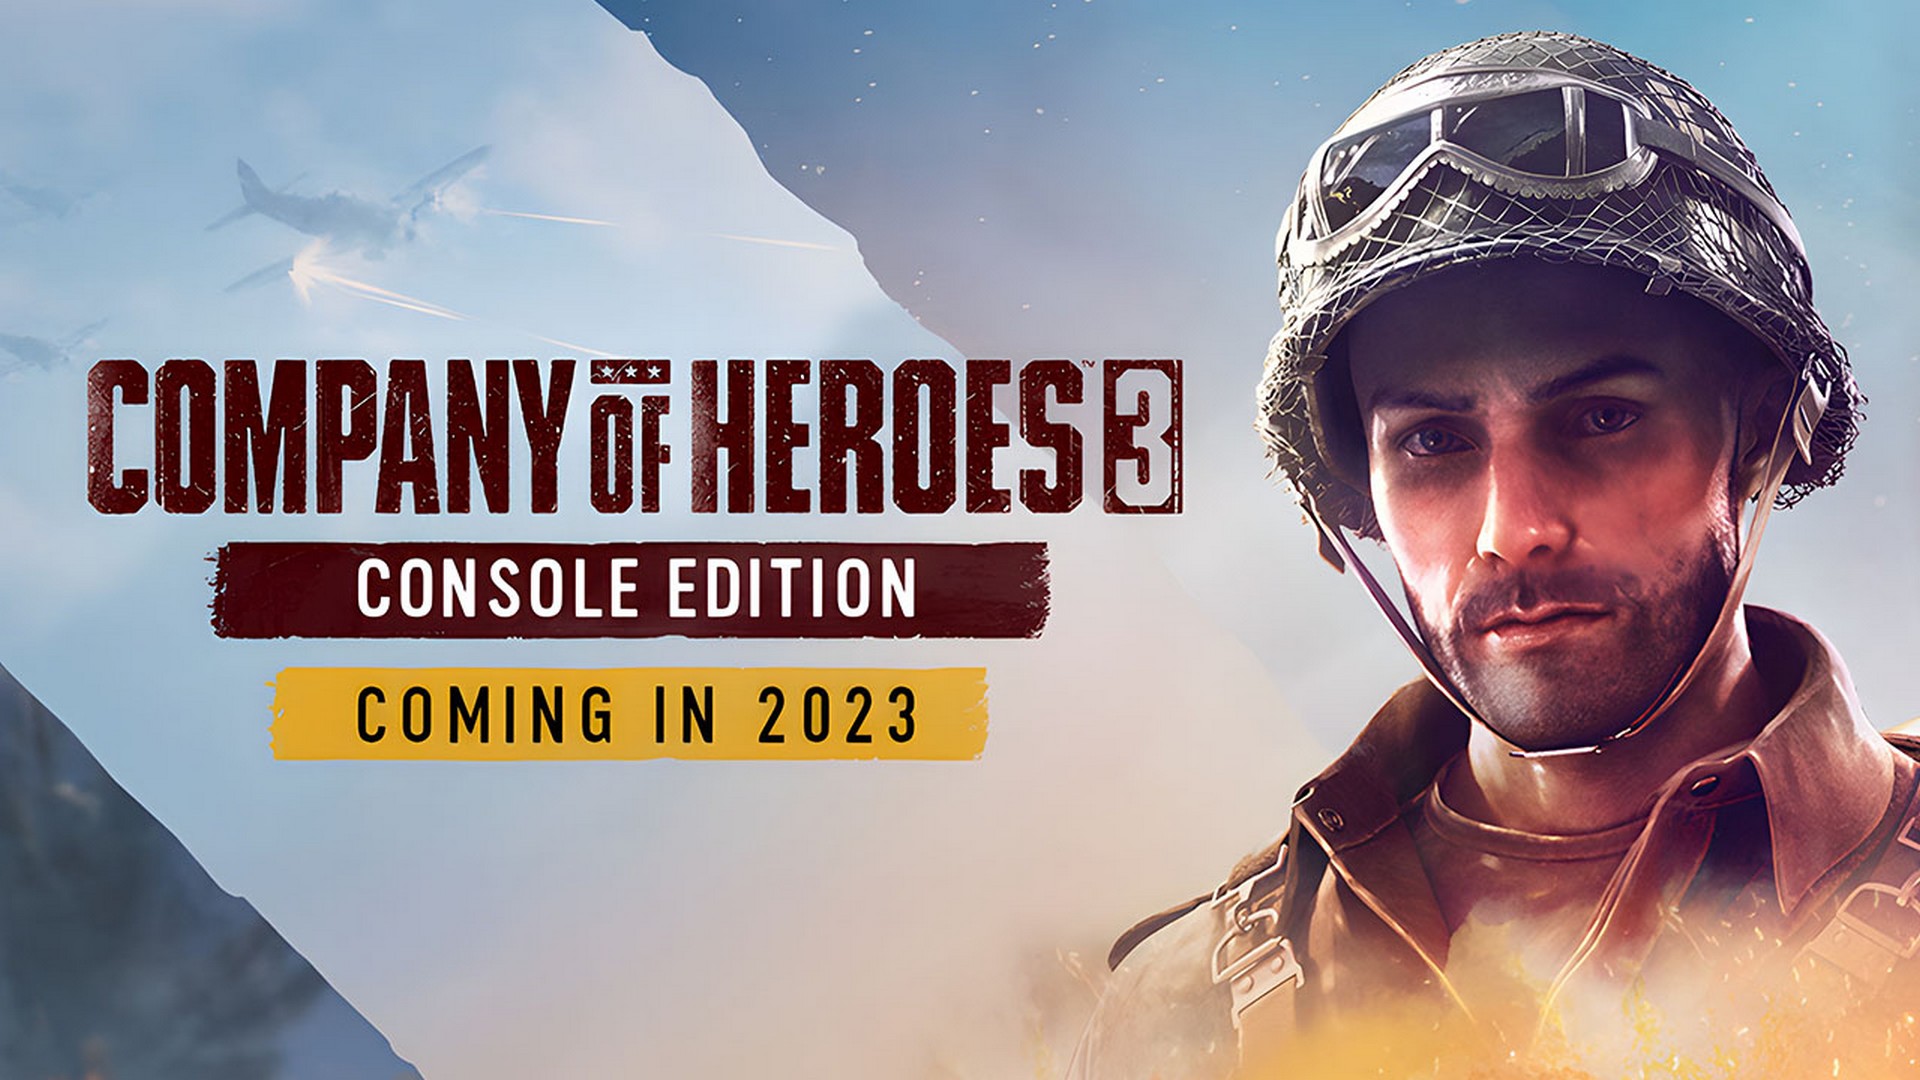 Company Of Heroes 3 Is Coming To Consoles In 2023